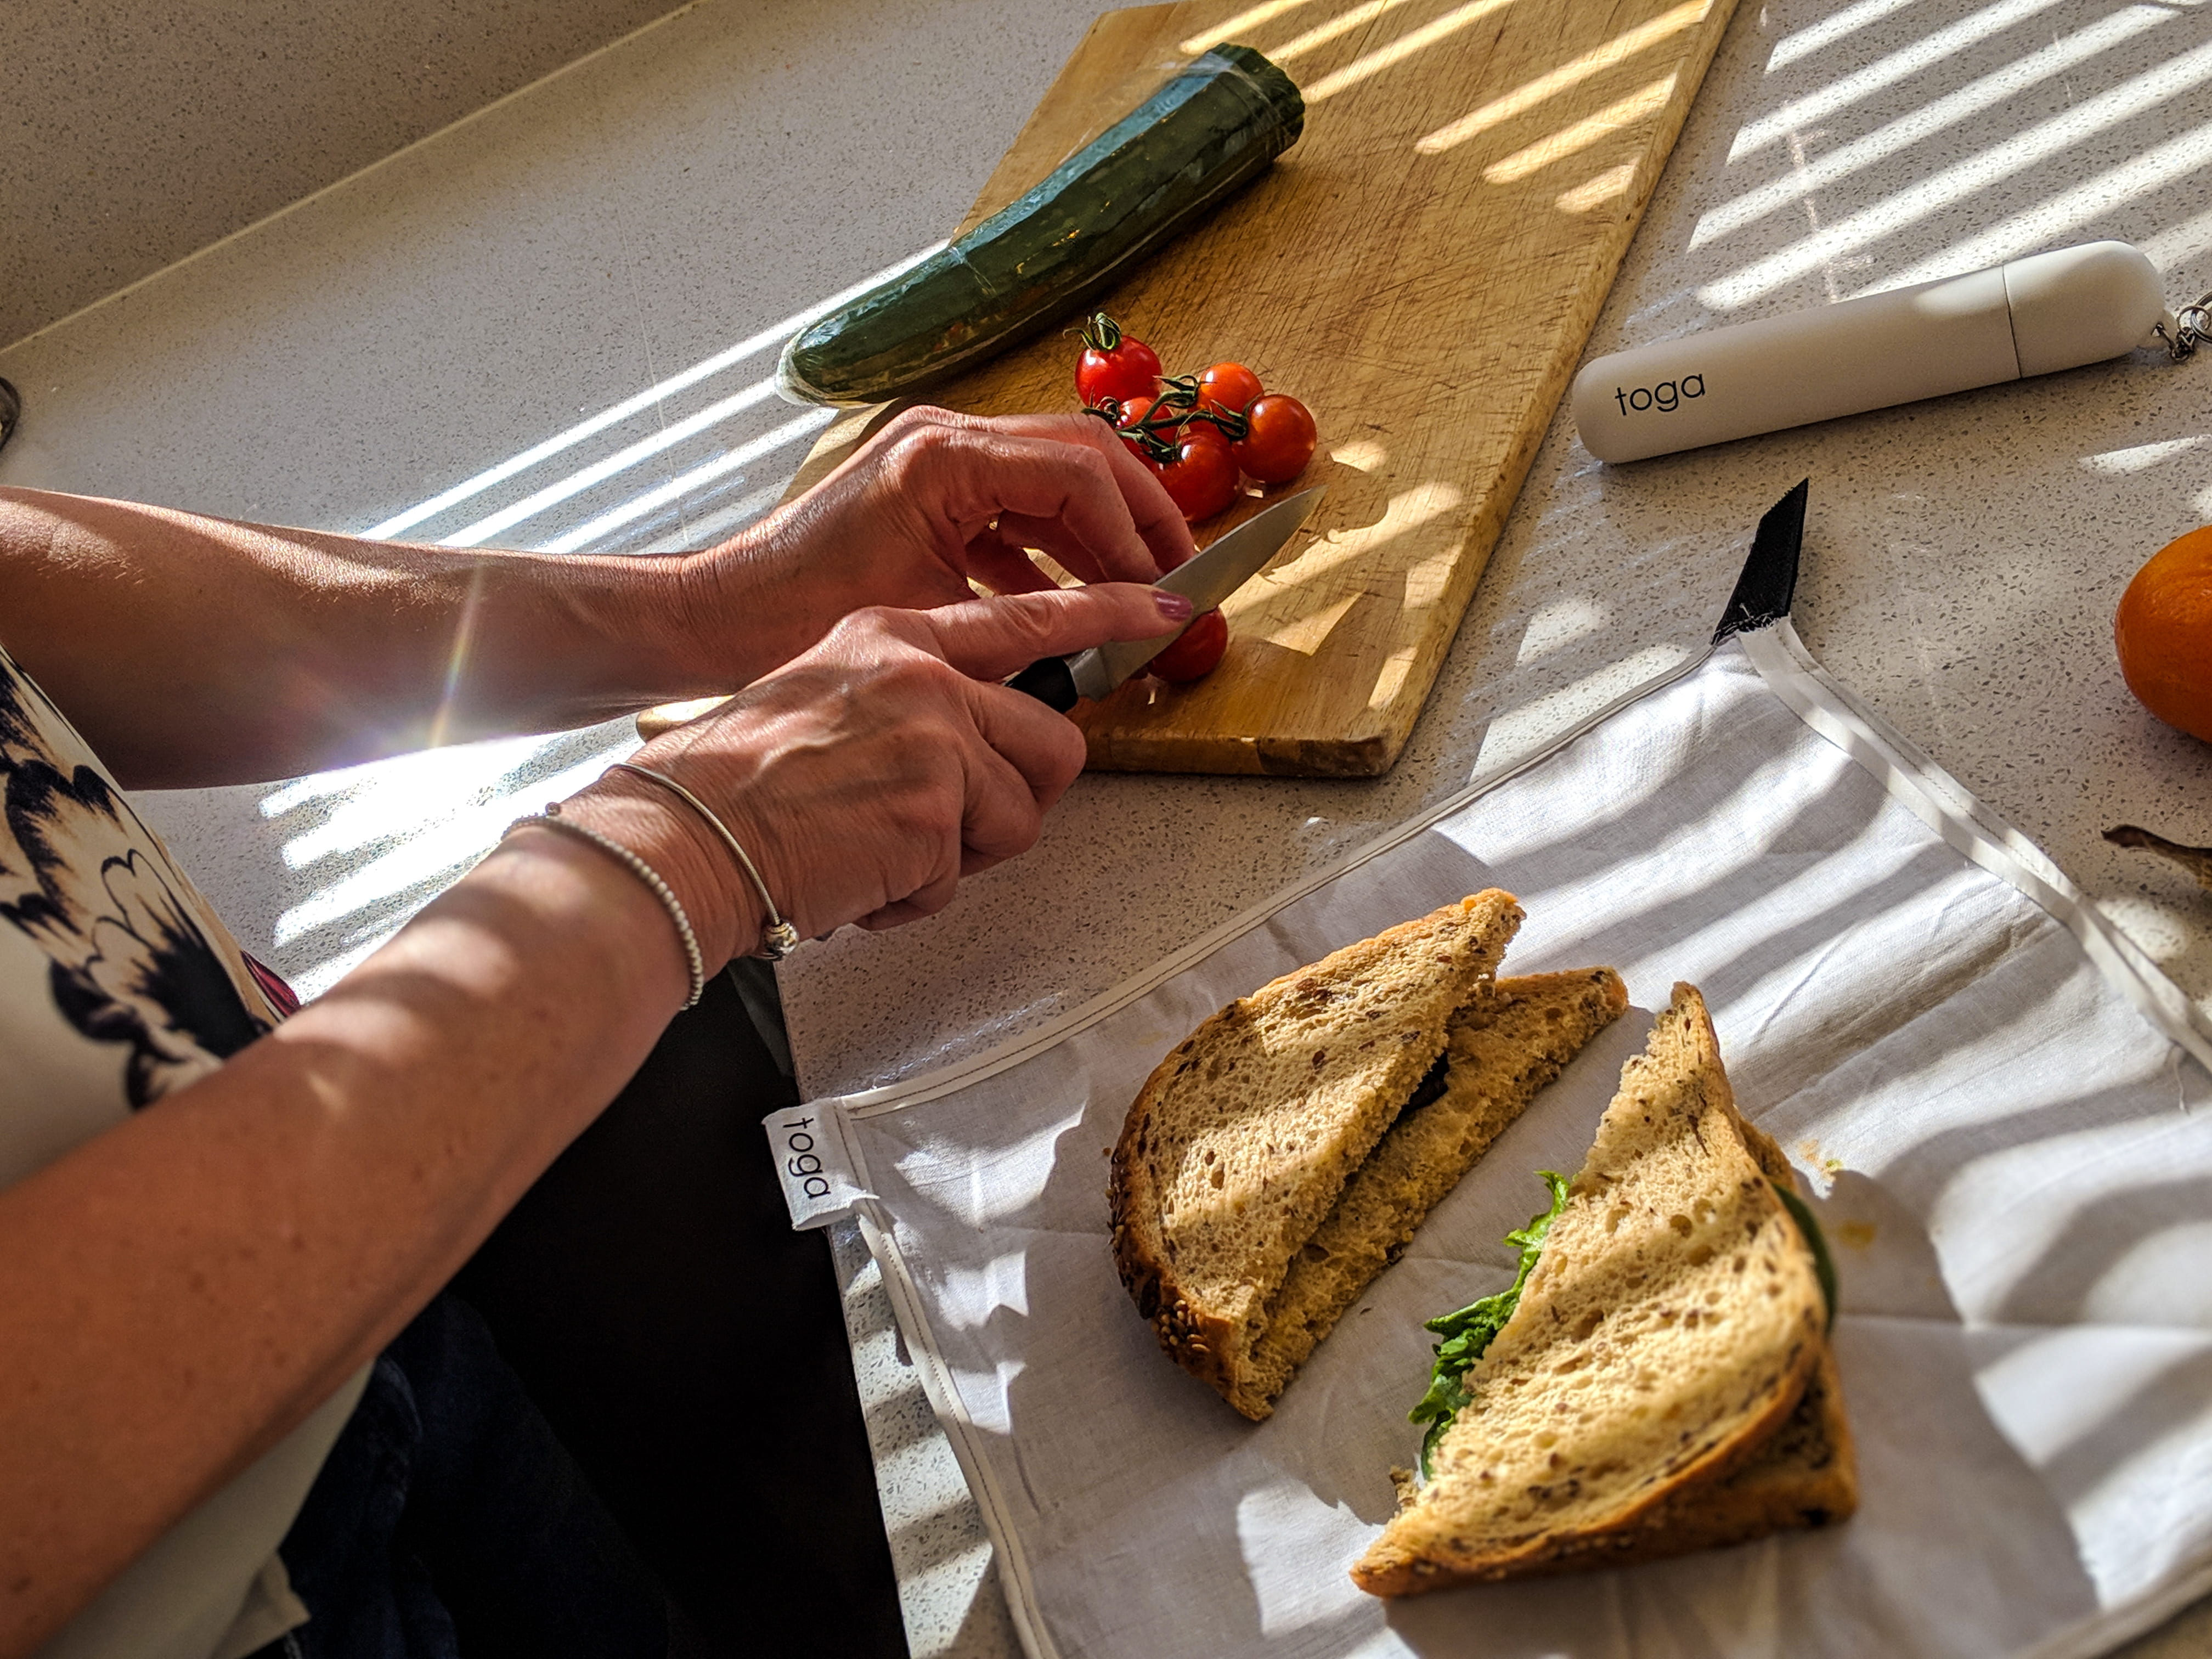 Vegetables being cut on a chopping board, with a cut sandwich and the Toga on the counter.